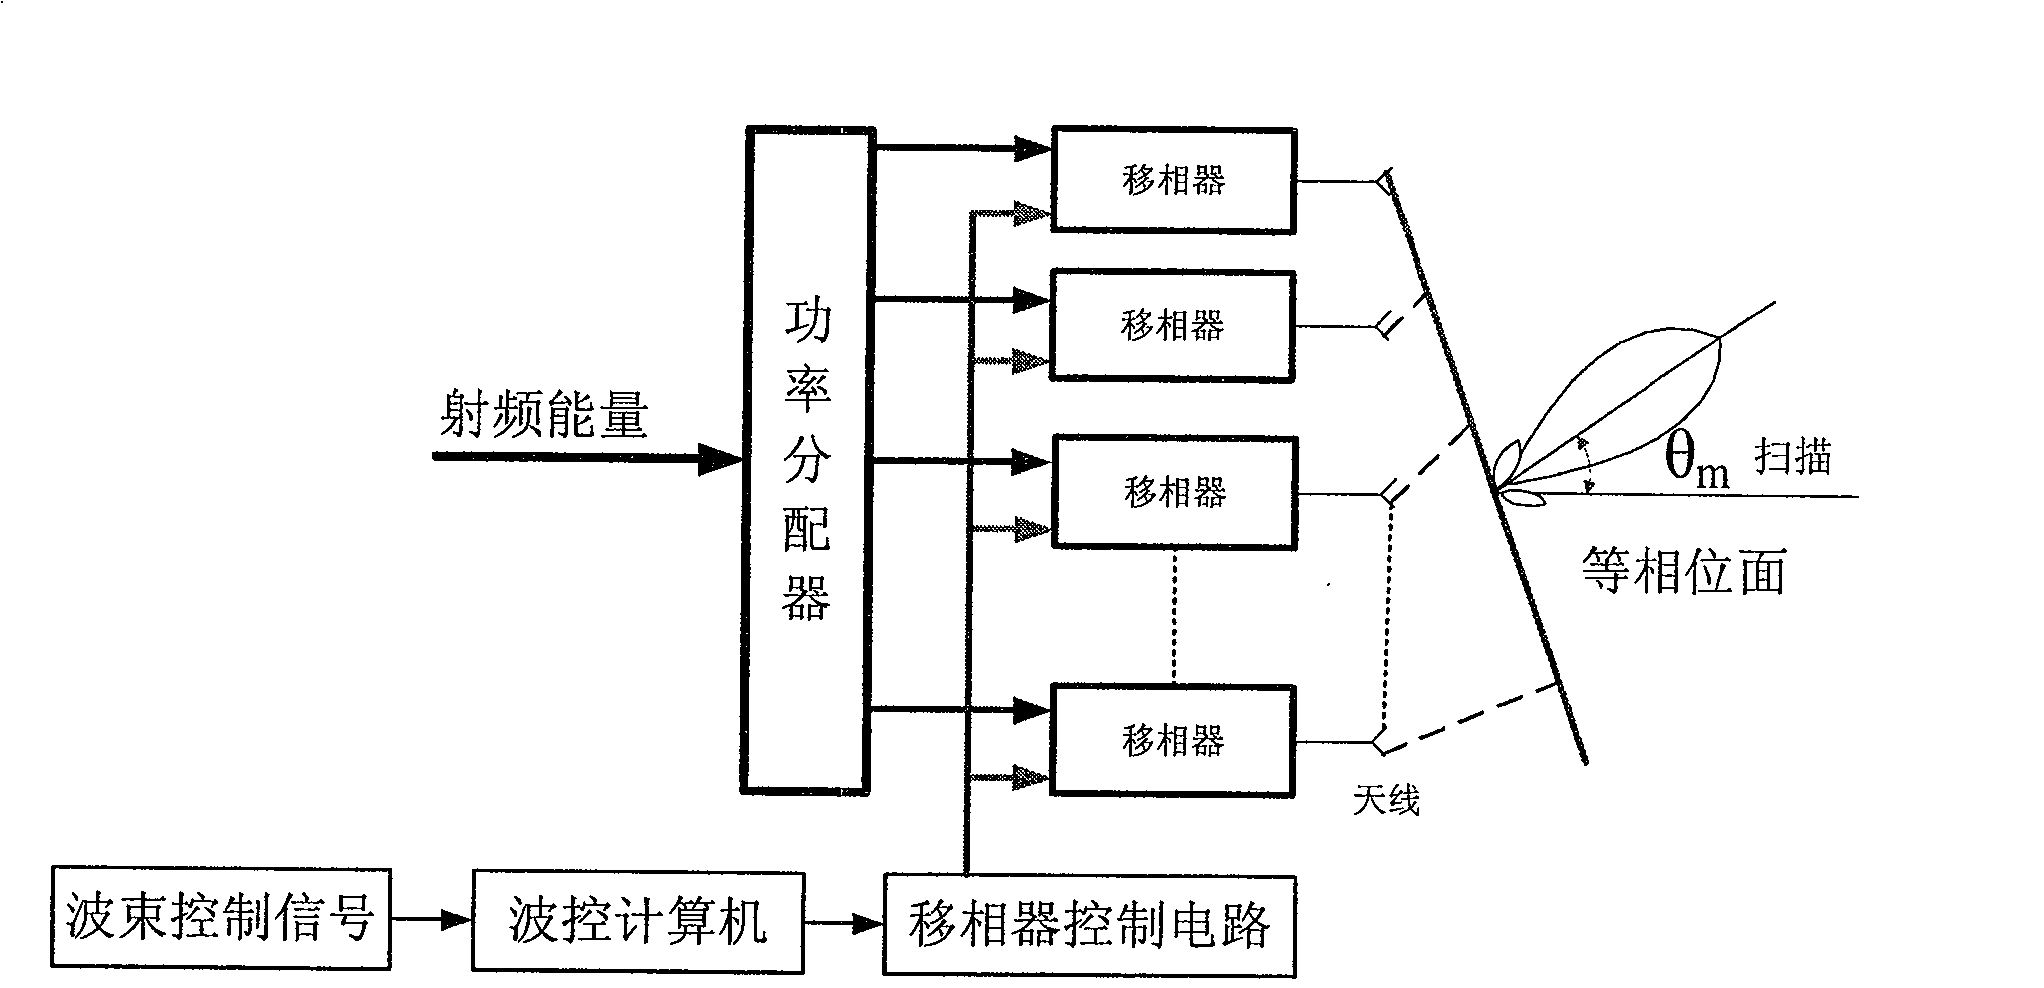 High furnace burden face measurement and control system based on industrial phased array radar